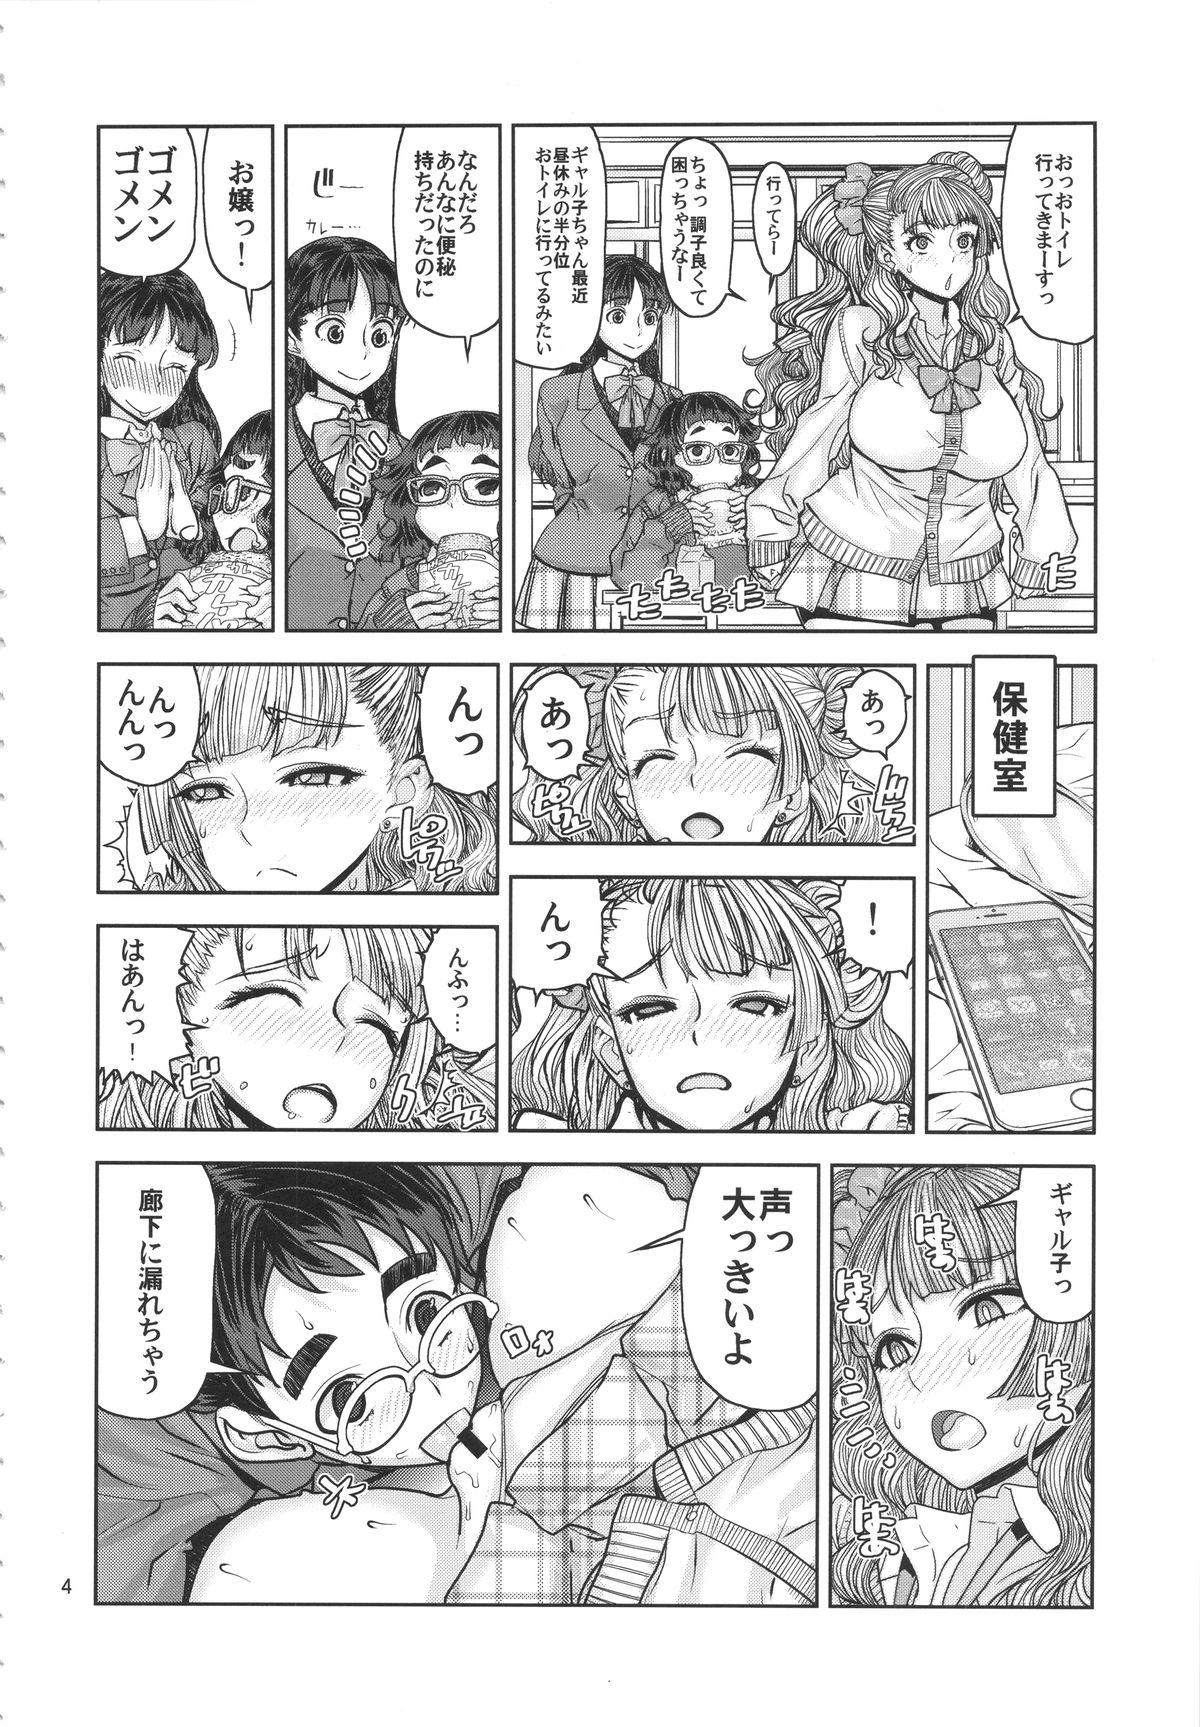 Gapes Gaping Asshole Leopard Hon 23 no 2 - Oshiete galko chan Amateurs Gone Wild - Page 3